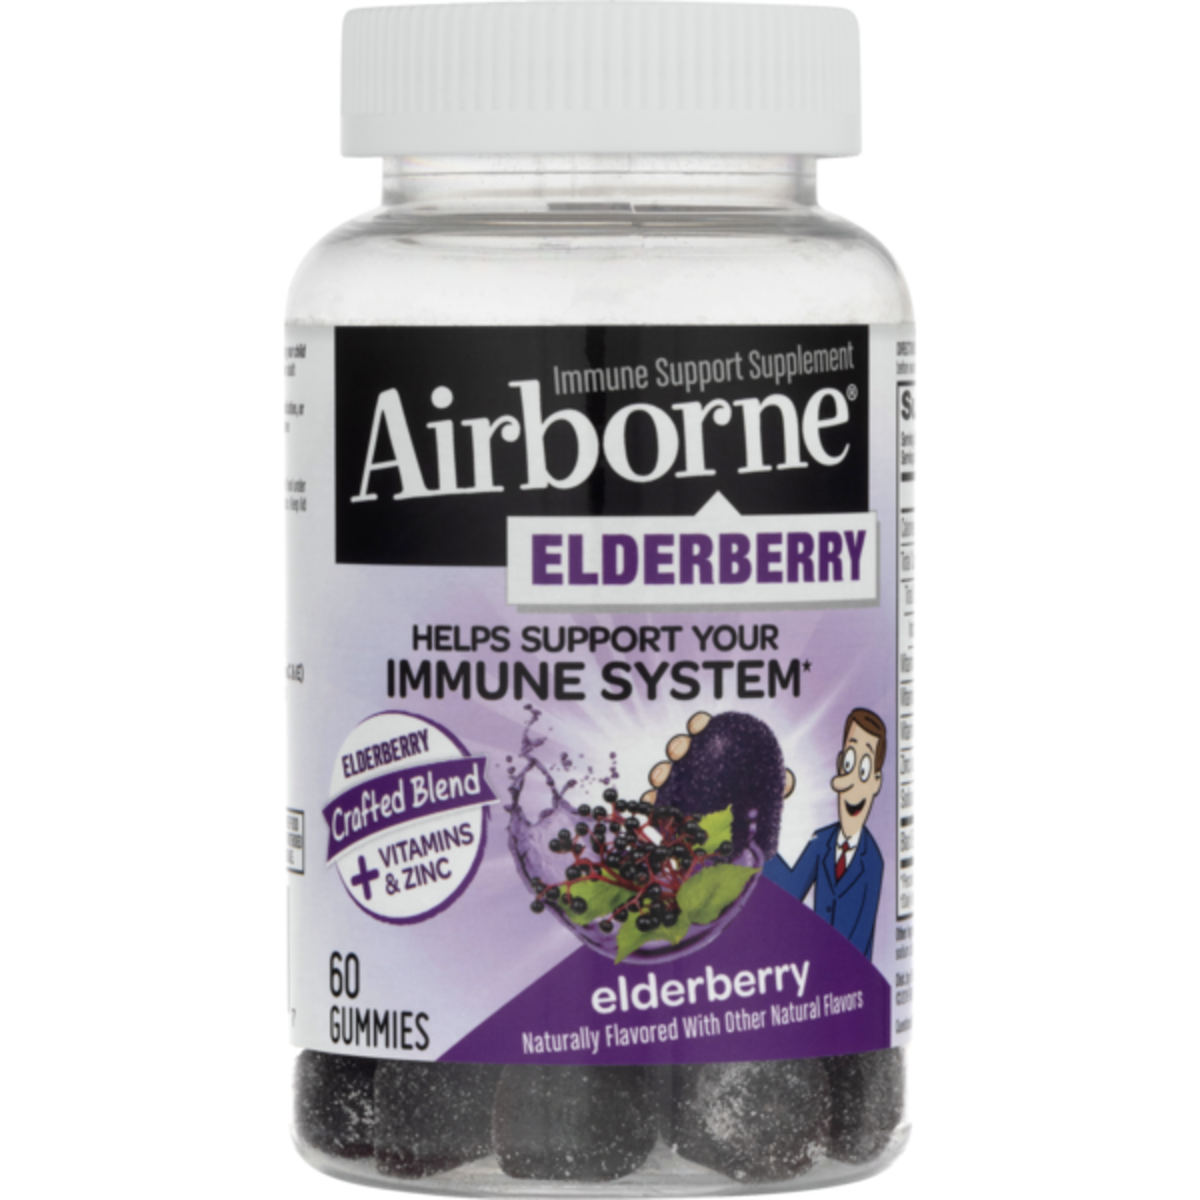 Elderberry is a well known antiviral that is available as a dietary supplement.